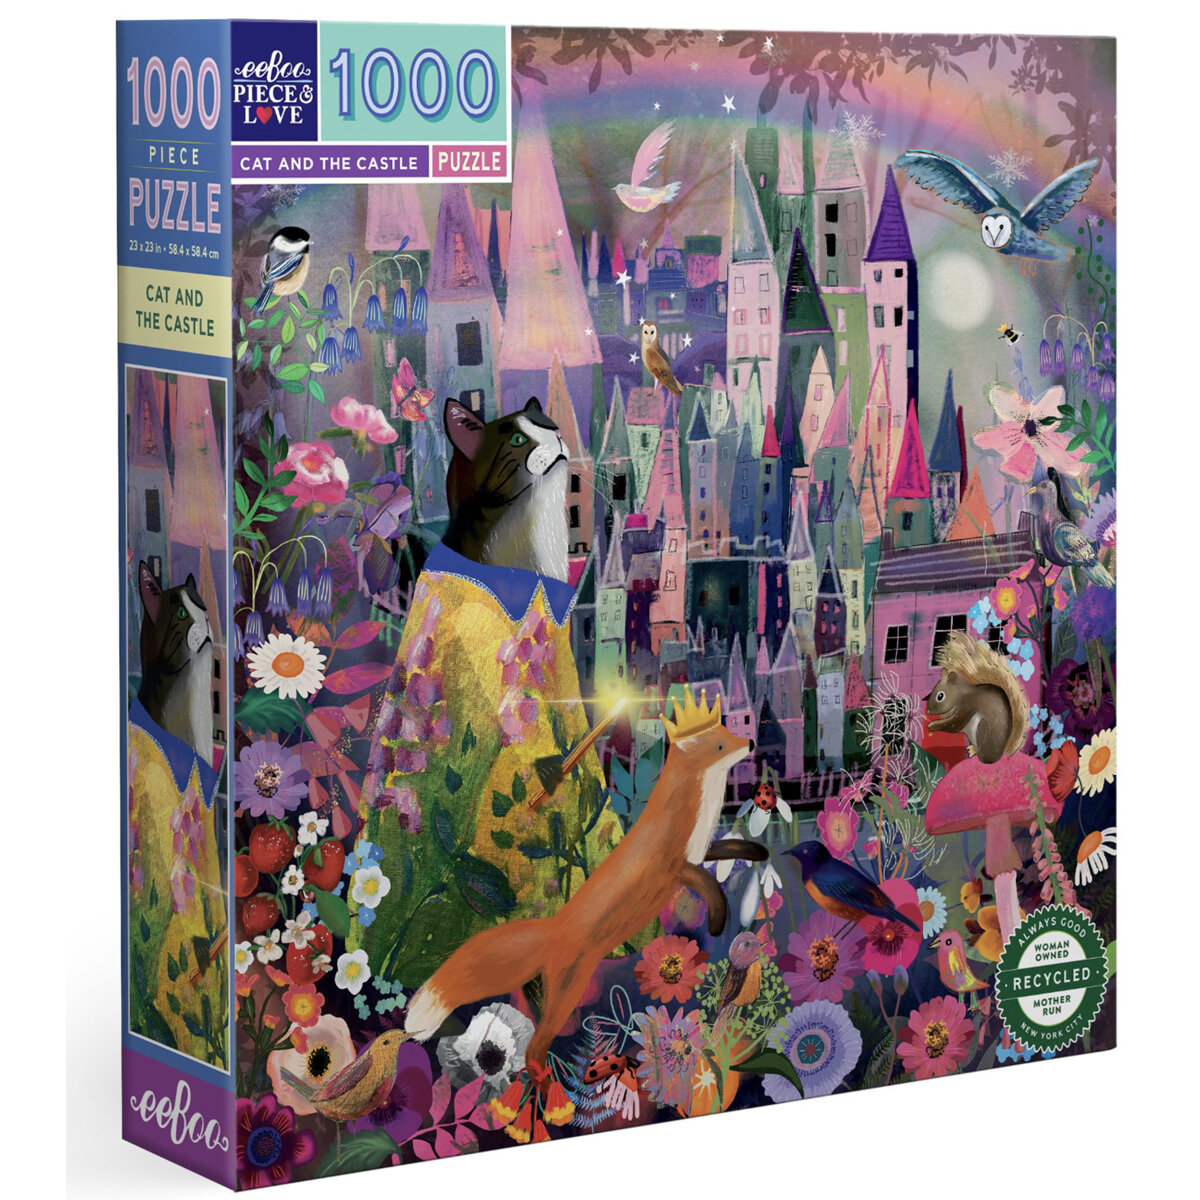 EeBoo Cat and the Castle 1000 Piece Puzzle *NEW!*